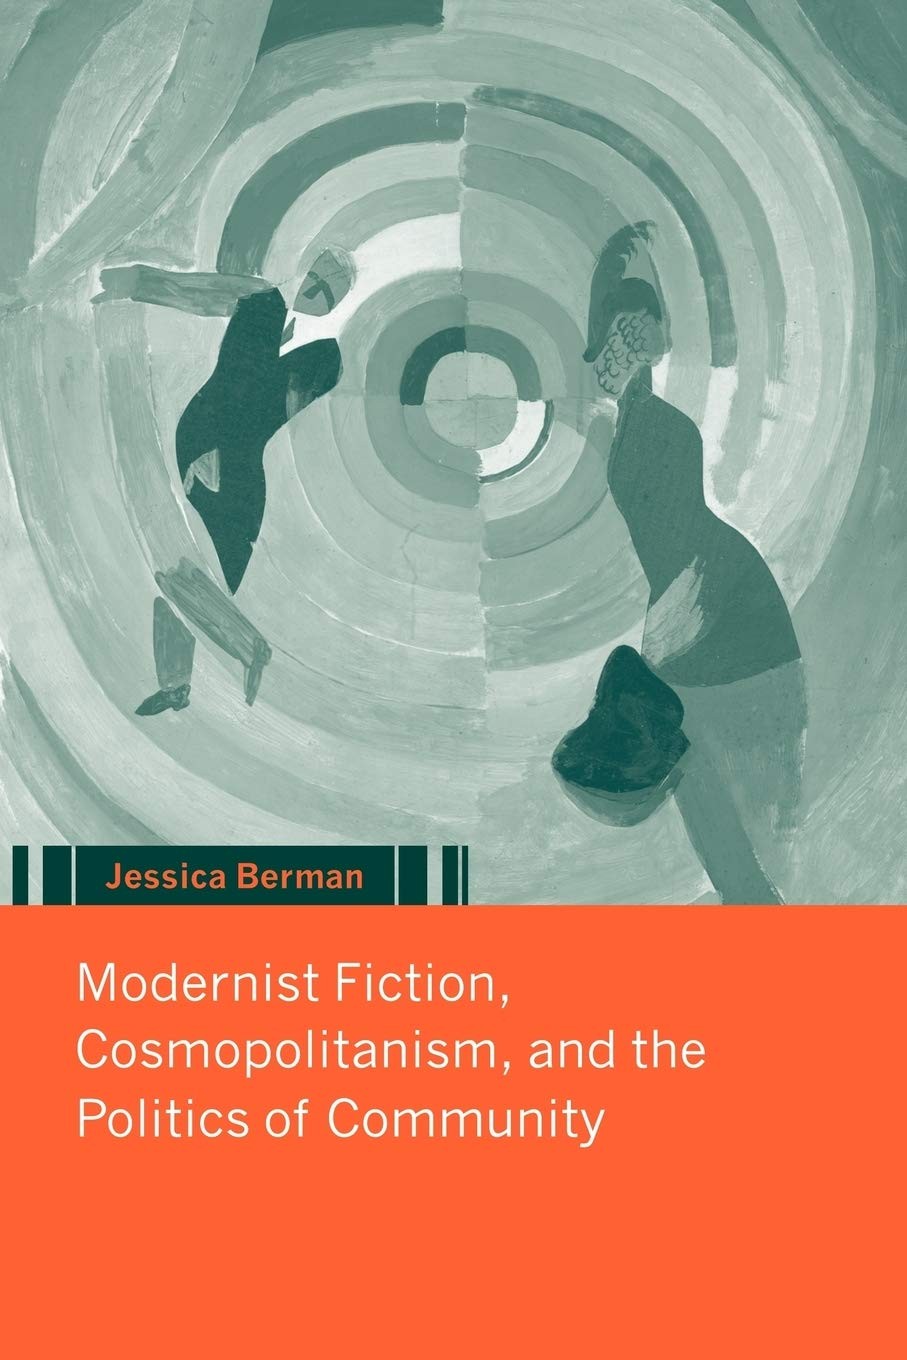 Modernist Fiction, Cosmopolitanism and the Politics of Community